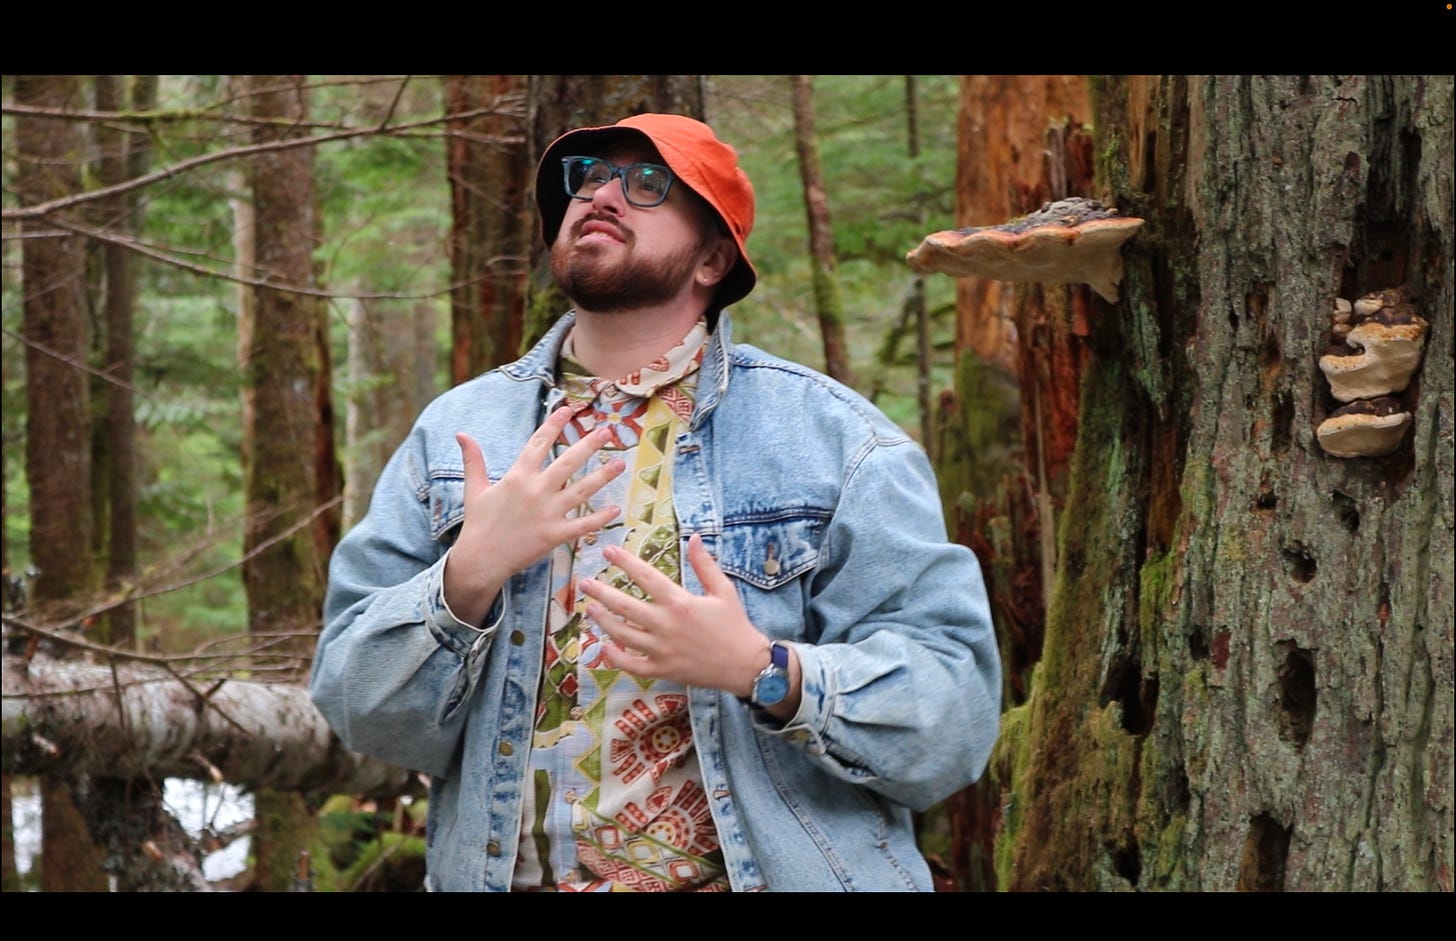 still image take from the death only comes when i'm awake music video of me singing in the foreground with an absolute king size mushroom protruding out the side of a tree behind me.